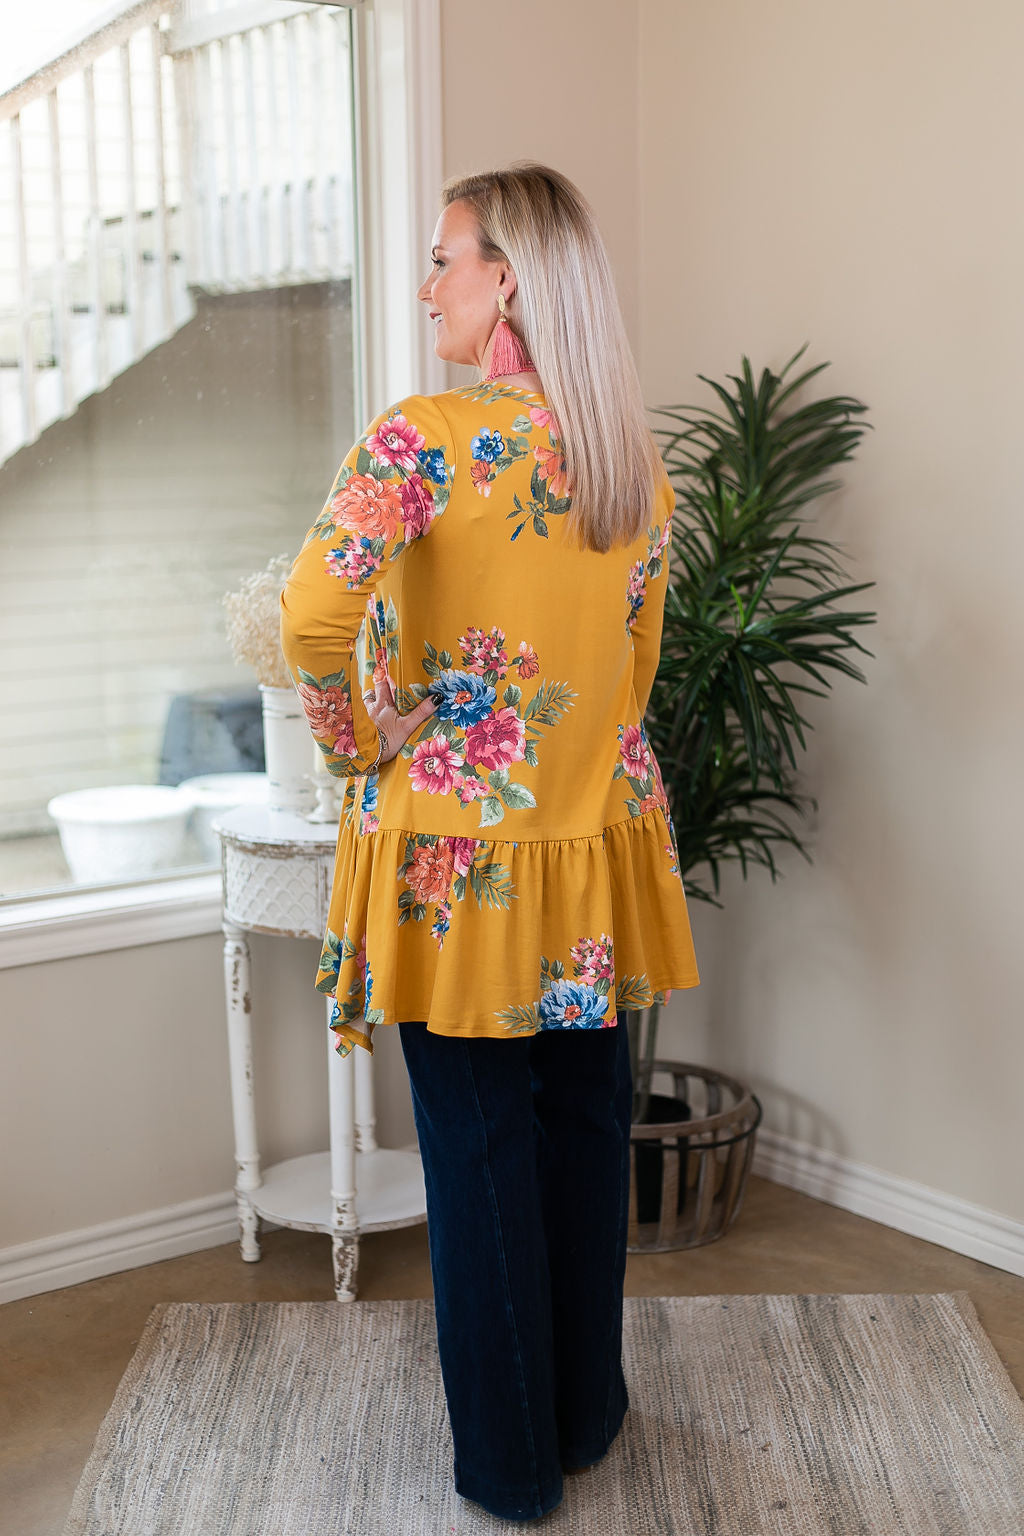 Free To Wander Floral Long Sleeve Peplum Tunic in Mustard Yellow - Giddy Up Glamour Boutique